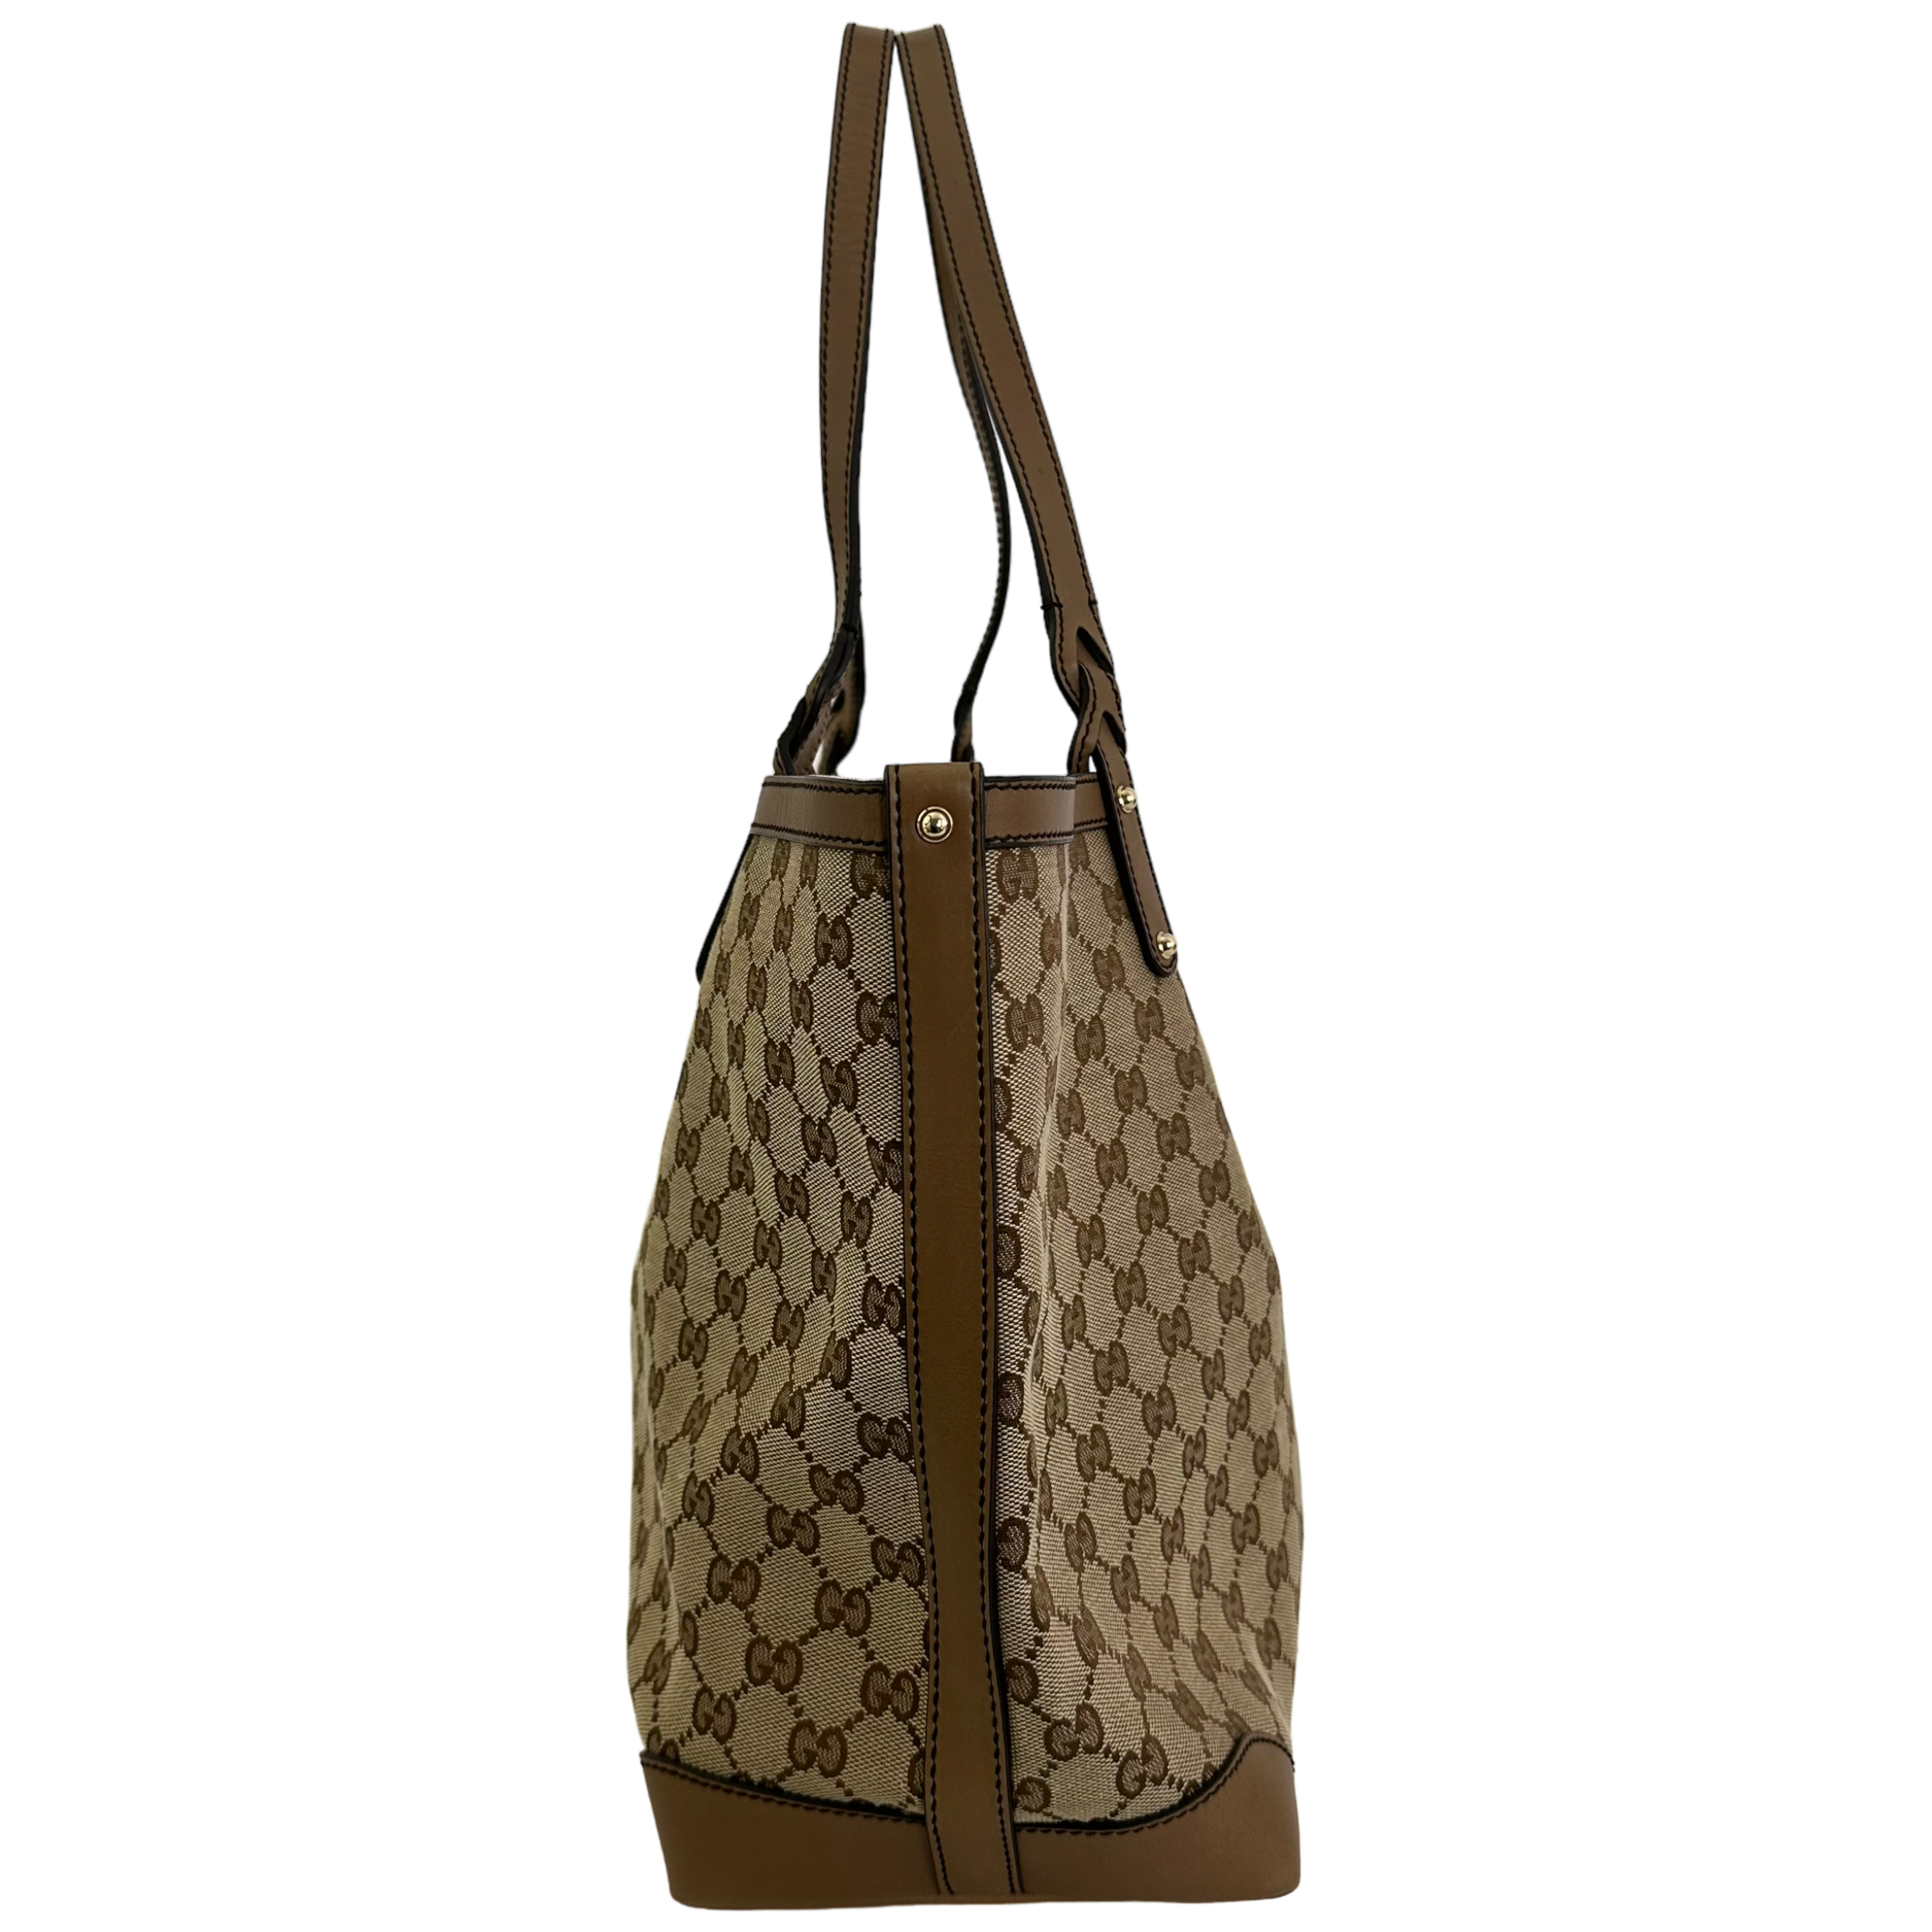 GG Brown Leather Tote